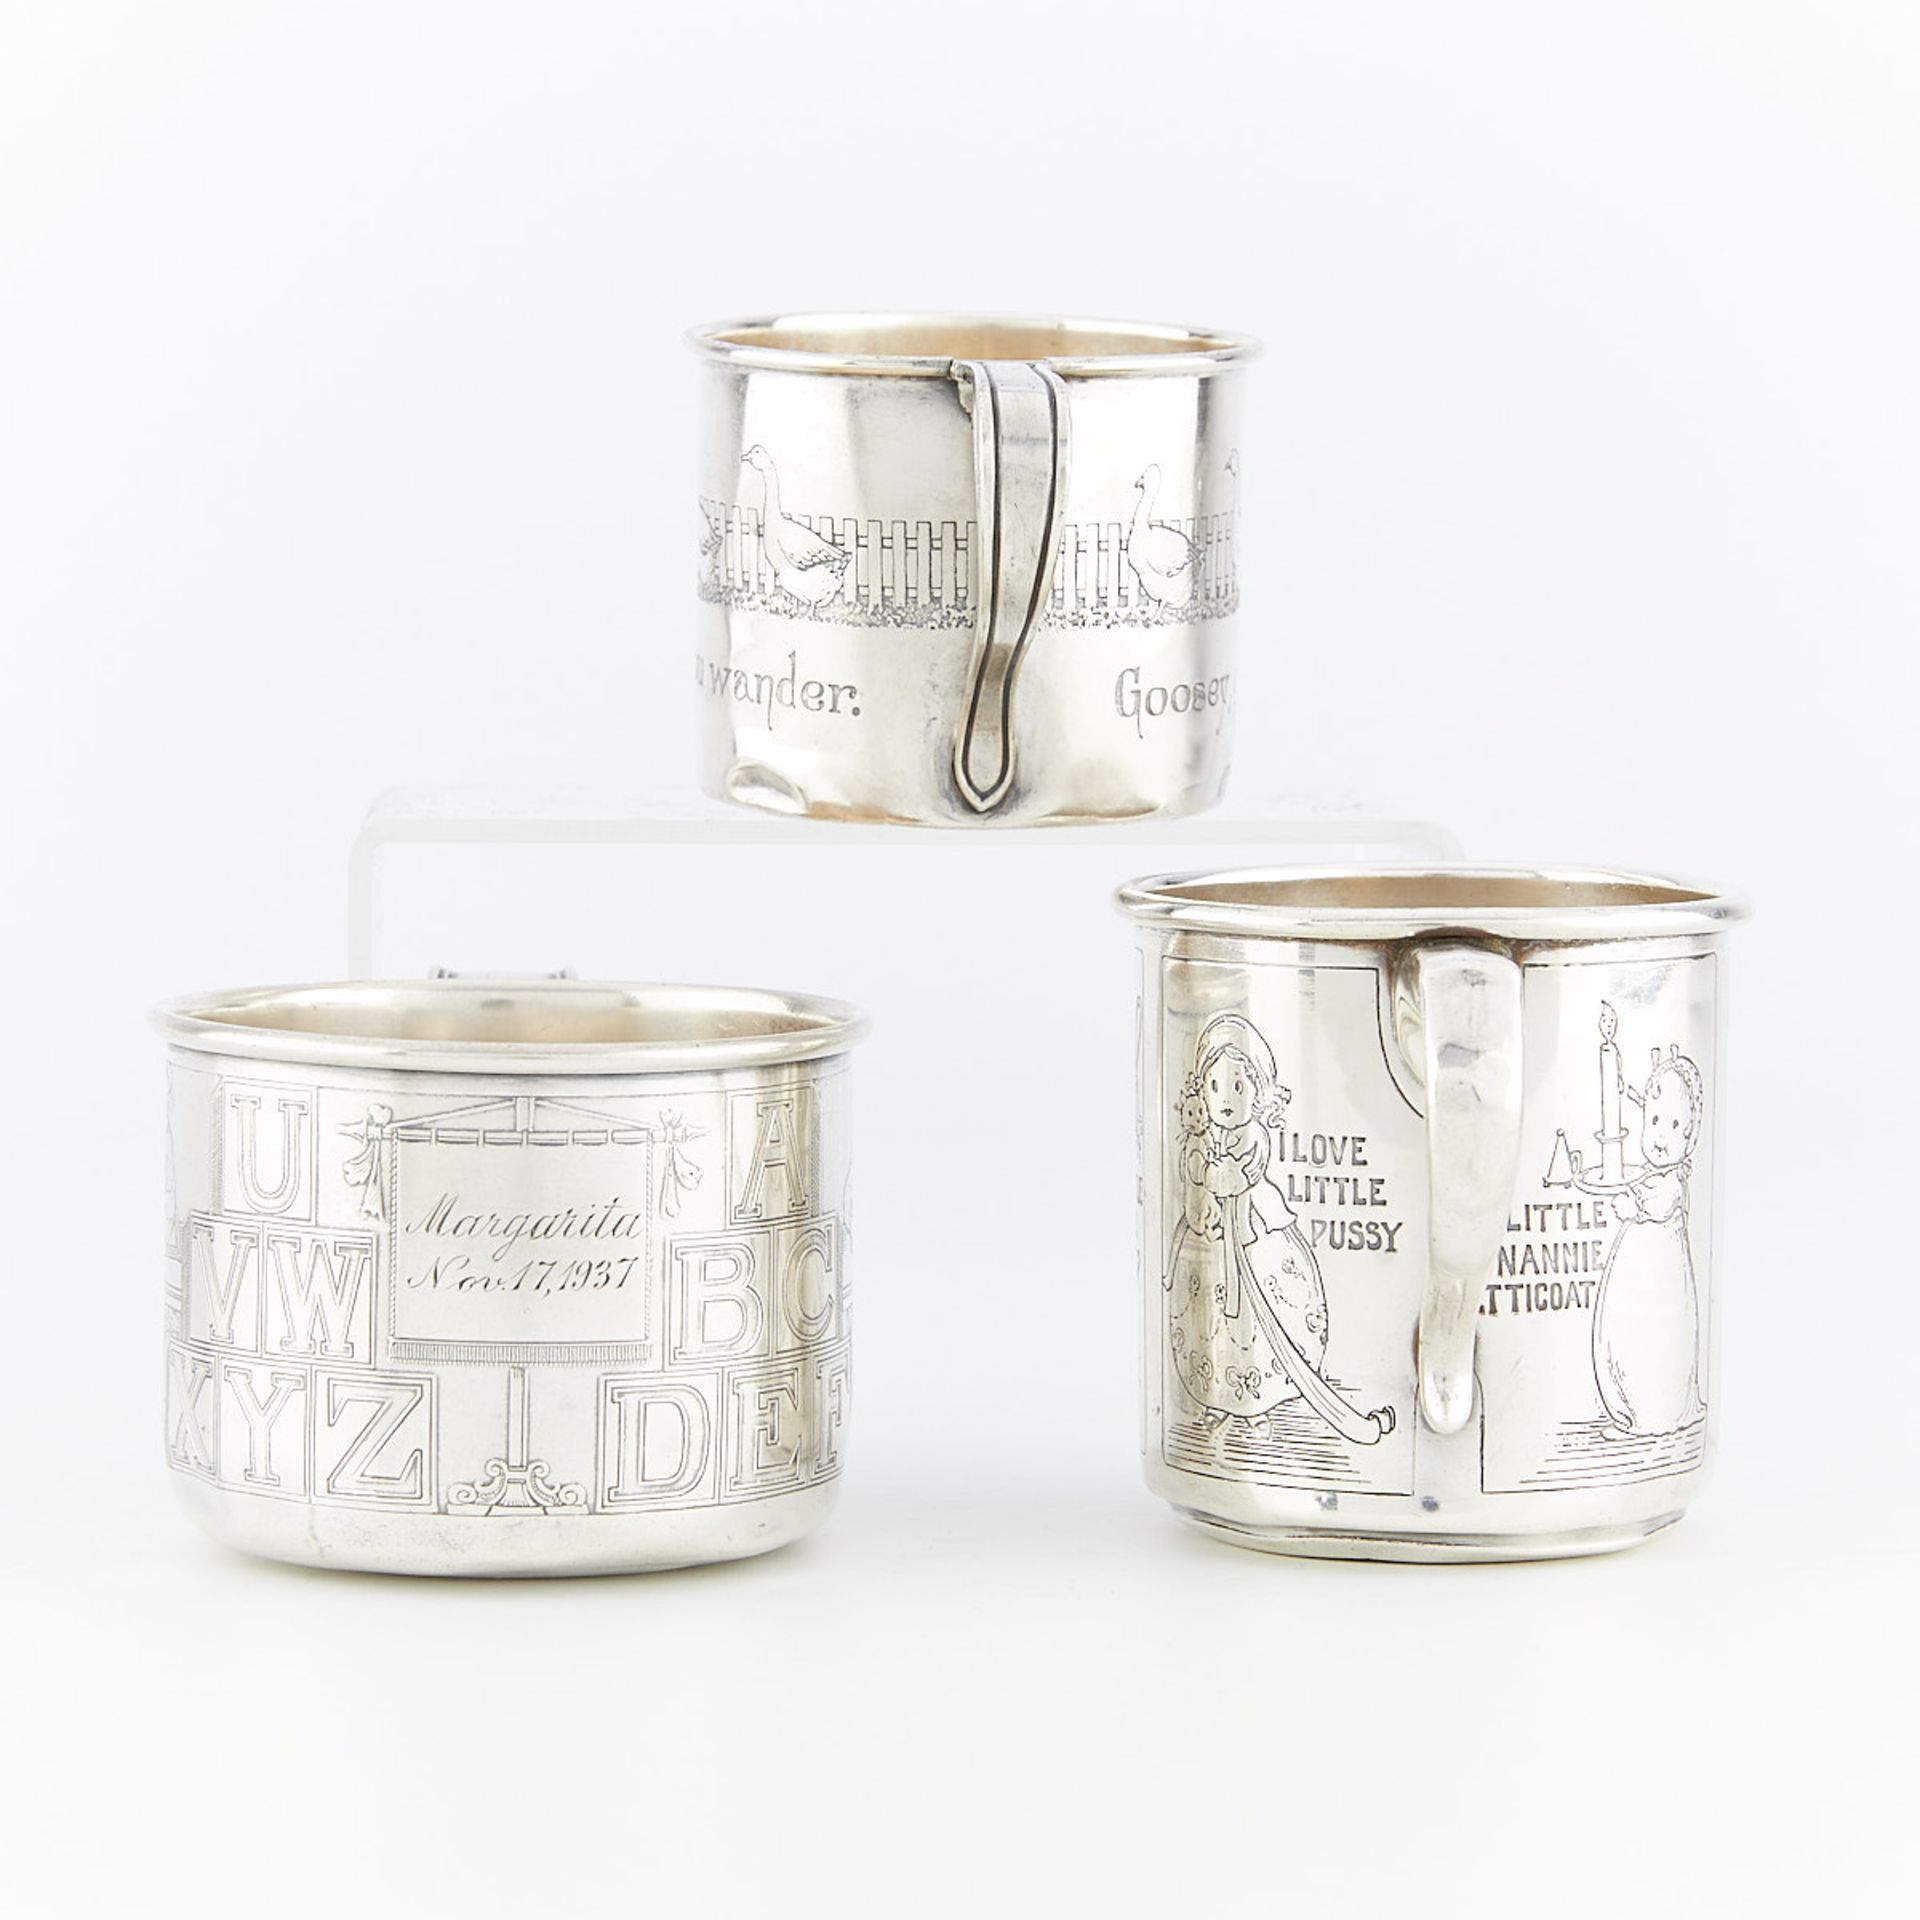 3 Sterling Silver Children's Mugs - Image 3 of 16